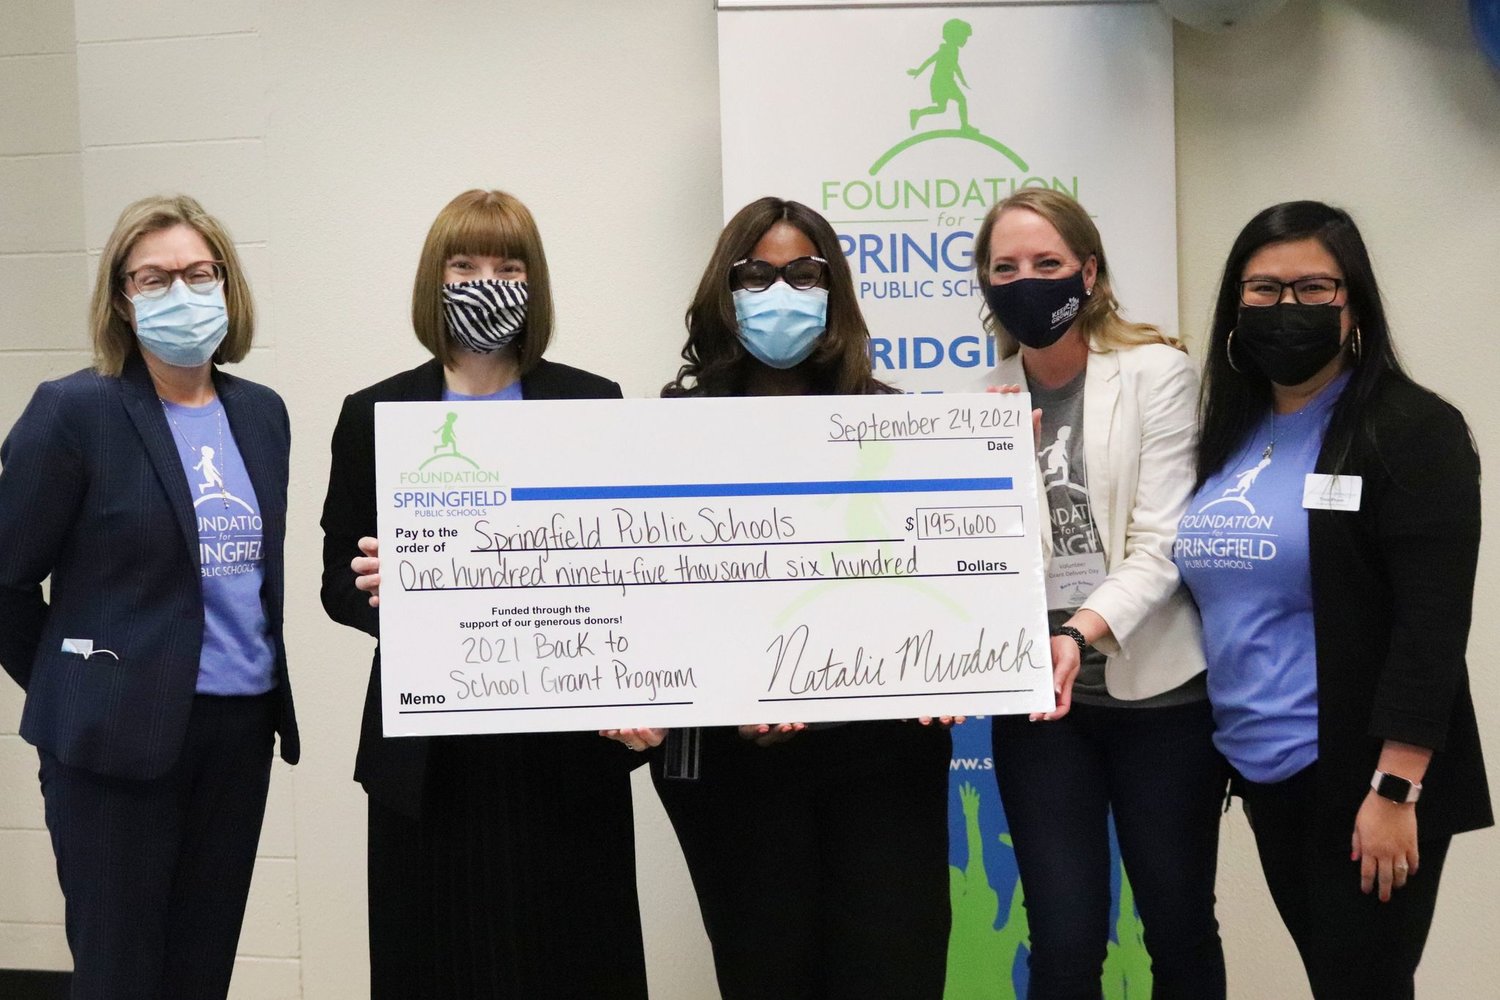 SPS Superintendent Grenita Lathan, center, and SPS board member Danielle Kincaid, second from right, accept a check from Foundation for SPS officials, from left, Jennifer McClure, Natalie Murdock and Tina Pham.